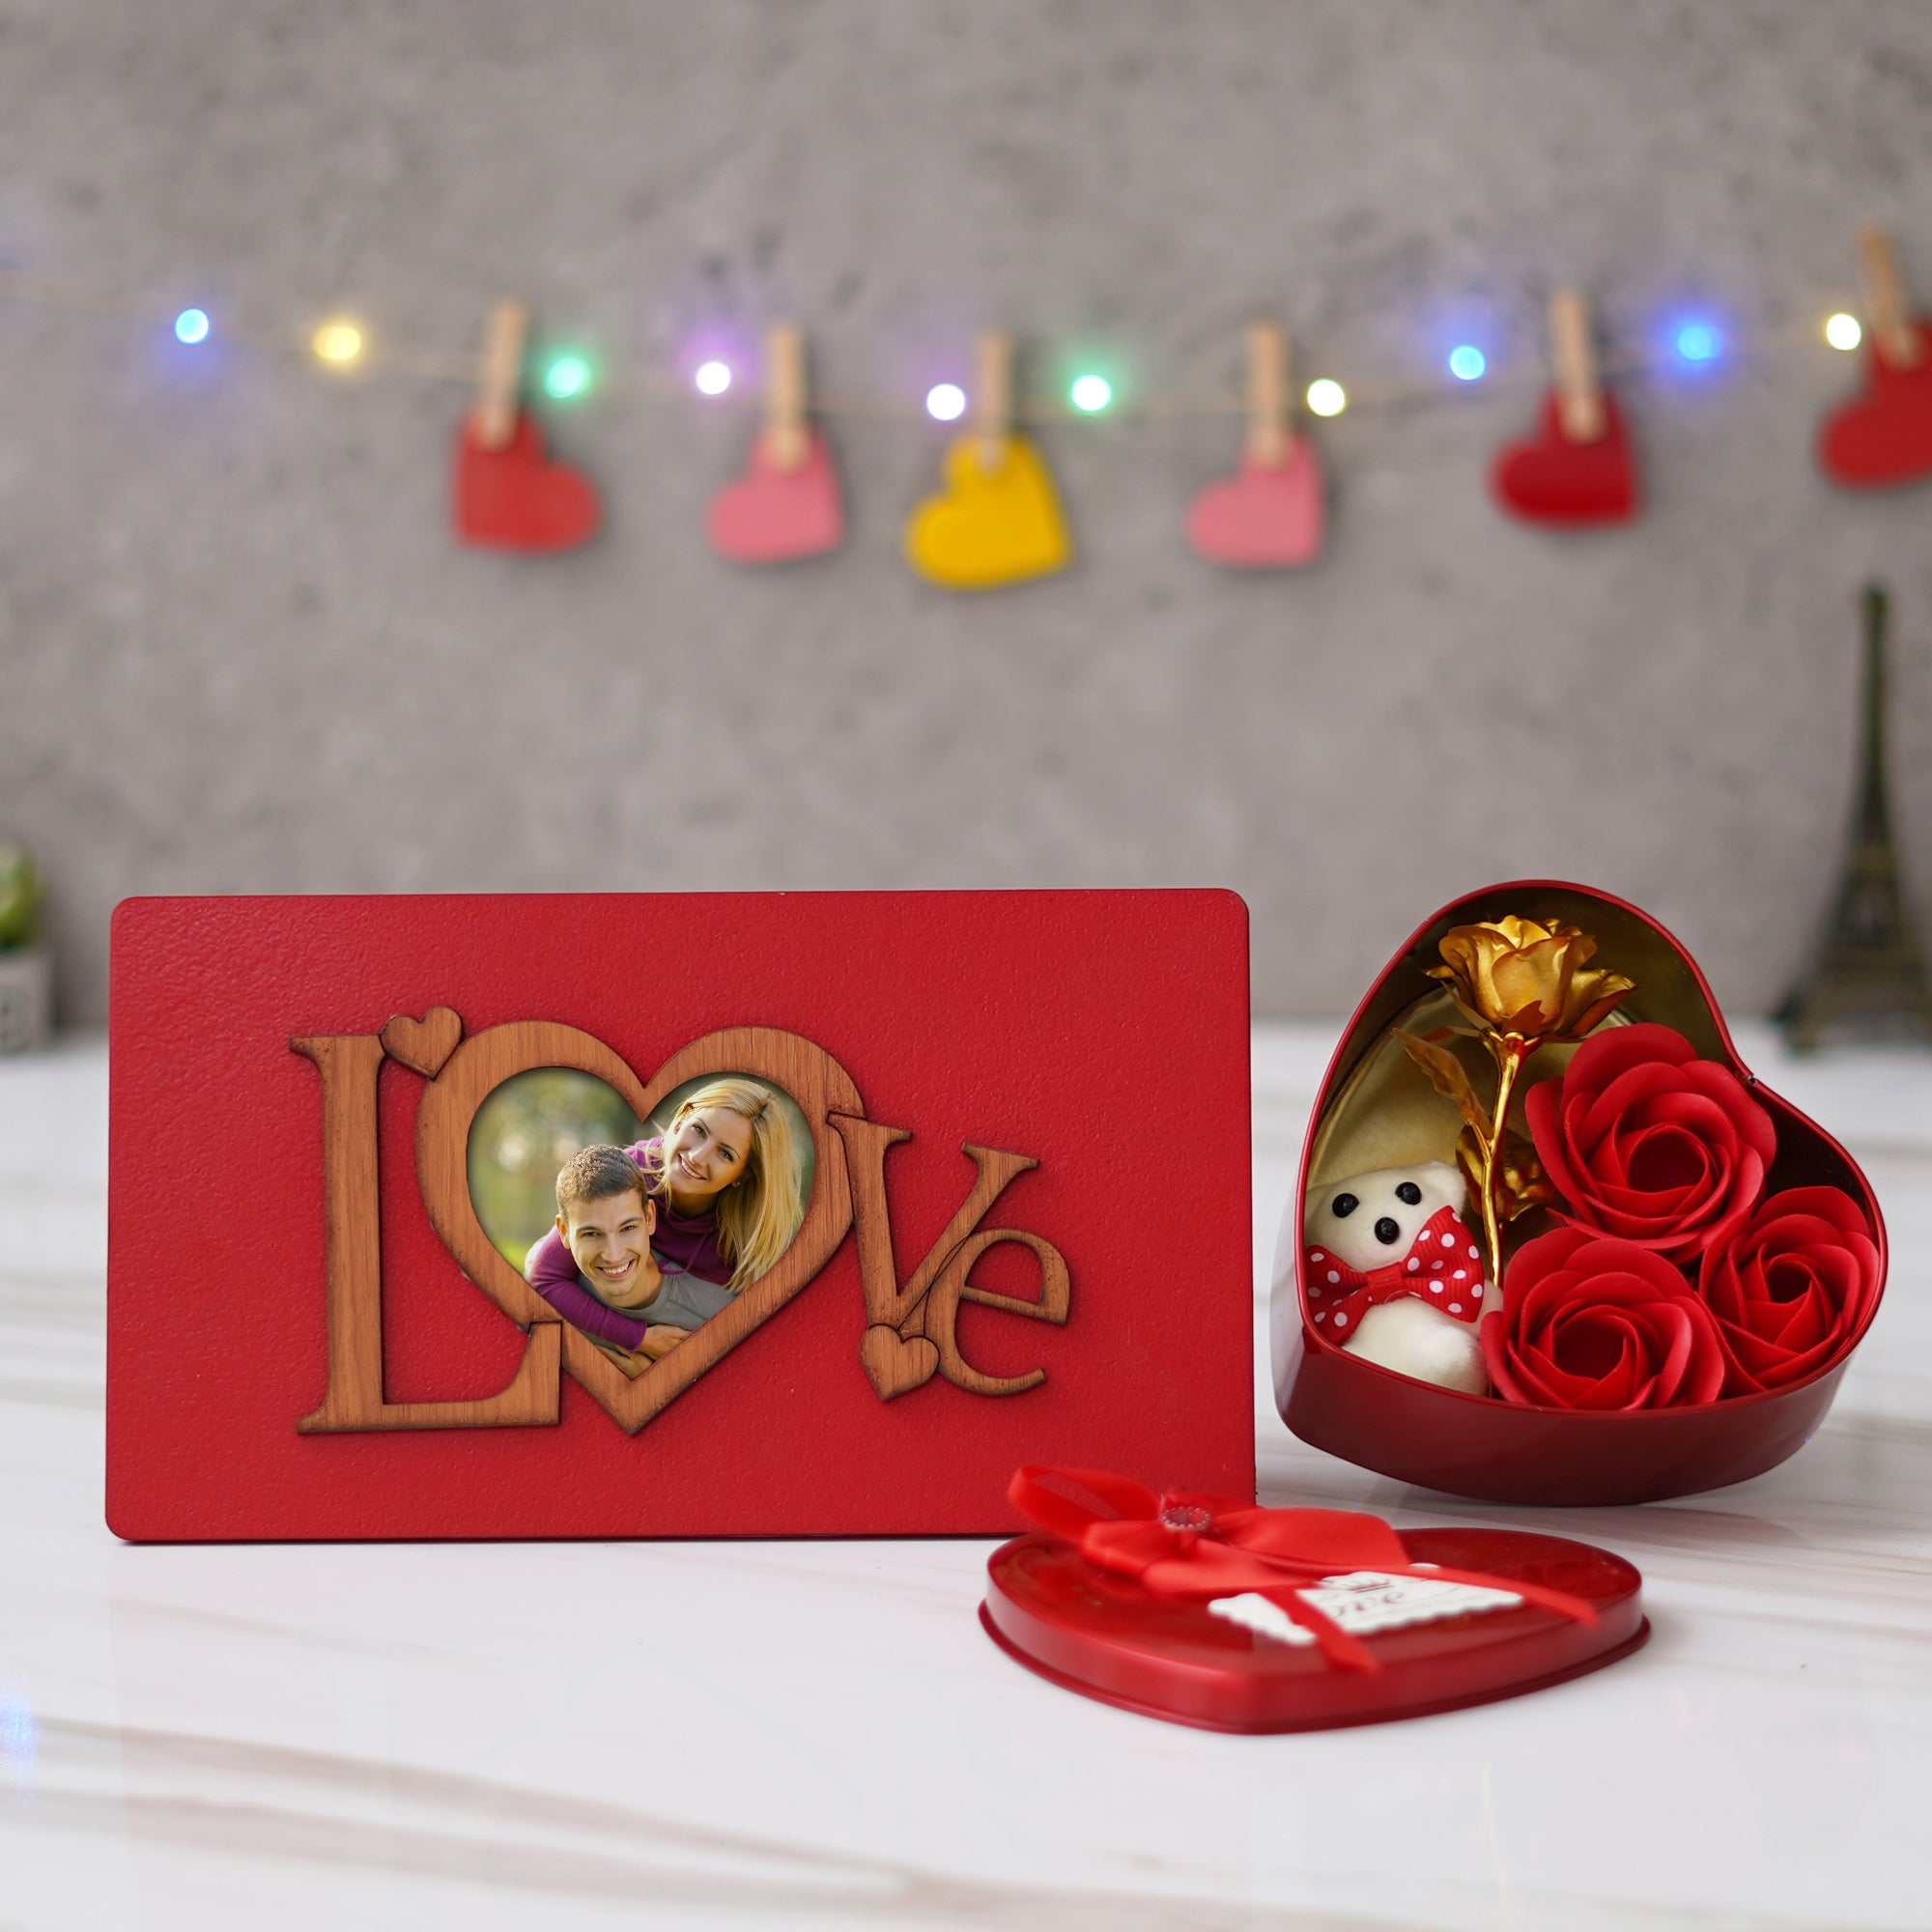 Valentine Combo of "Love" Wooden Photo Frame With Red Stand, Red Heart Shaped Gift Box